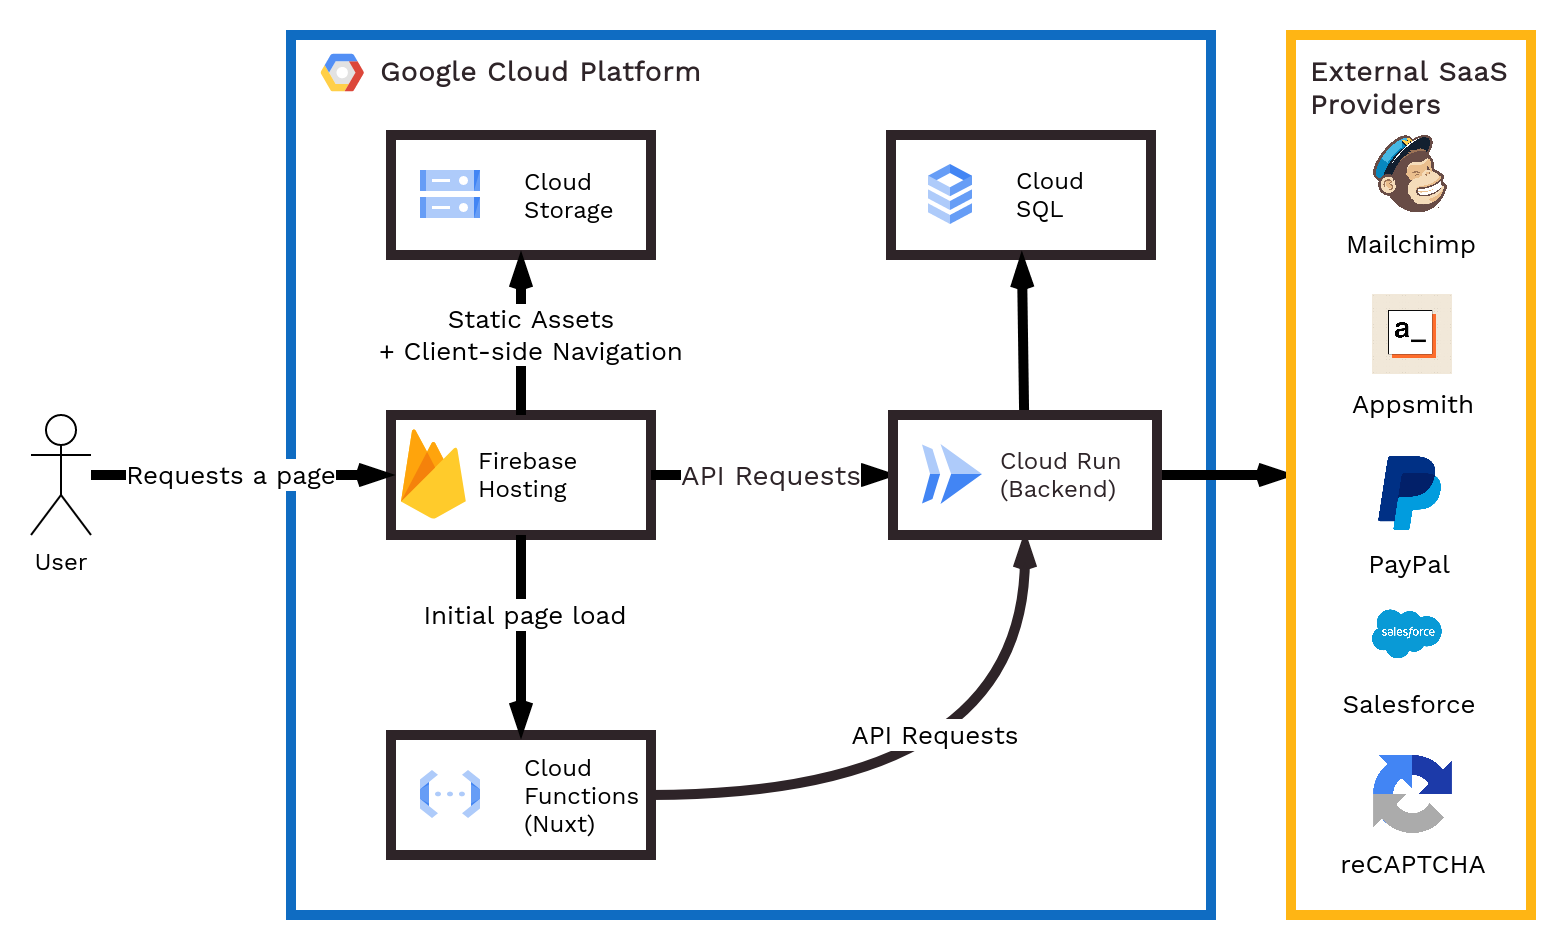 A flow diagram showing how data flows from end-users, through Firebase, to Cloud Run, then to SQL and external service providers.